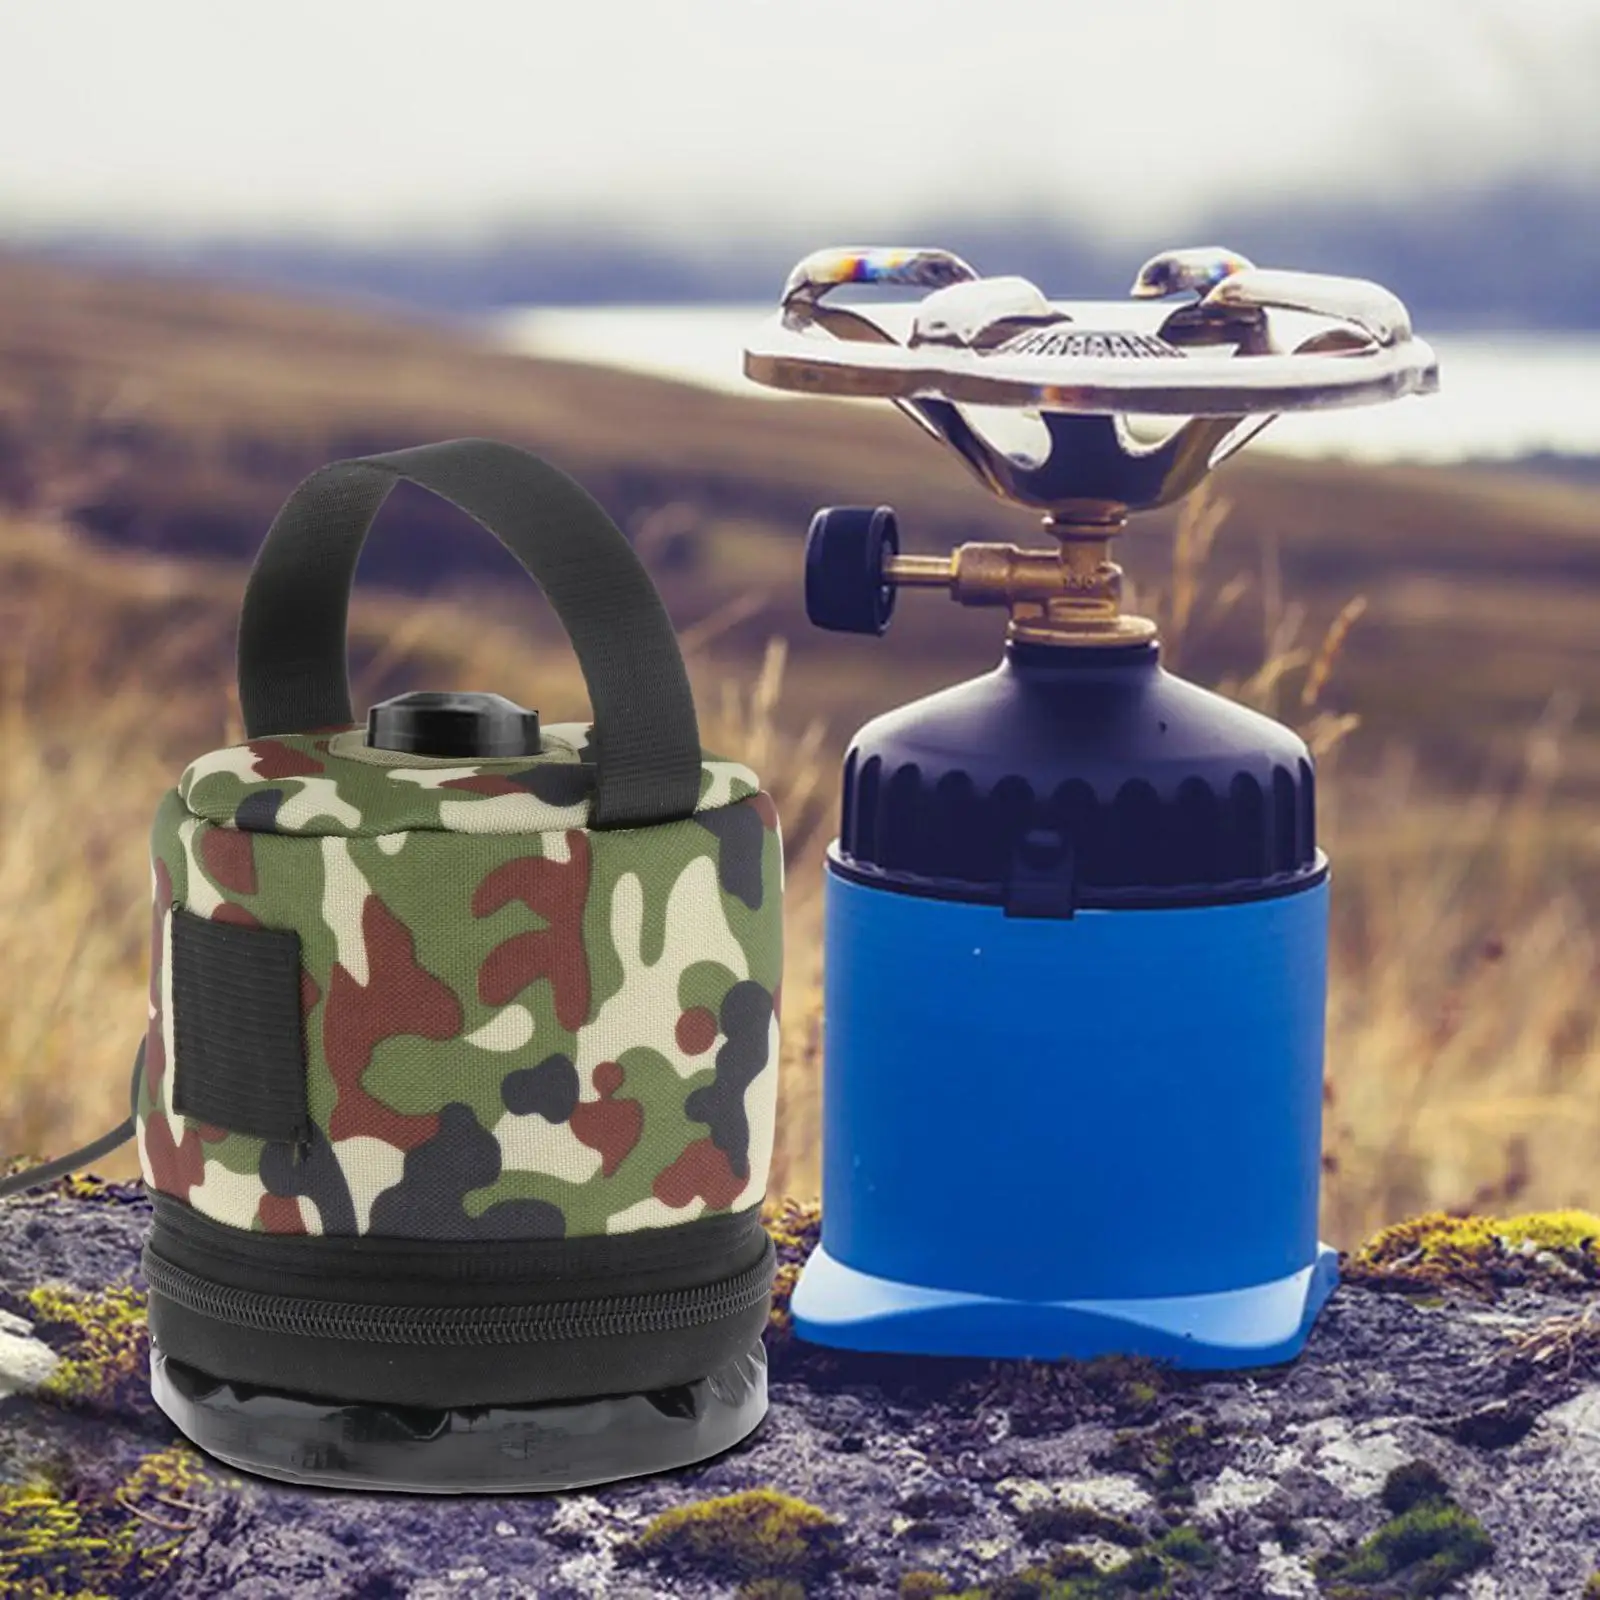 Camping Gas Canister Cover USB Heated Durable Portable Protector Storage Bag